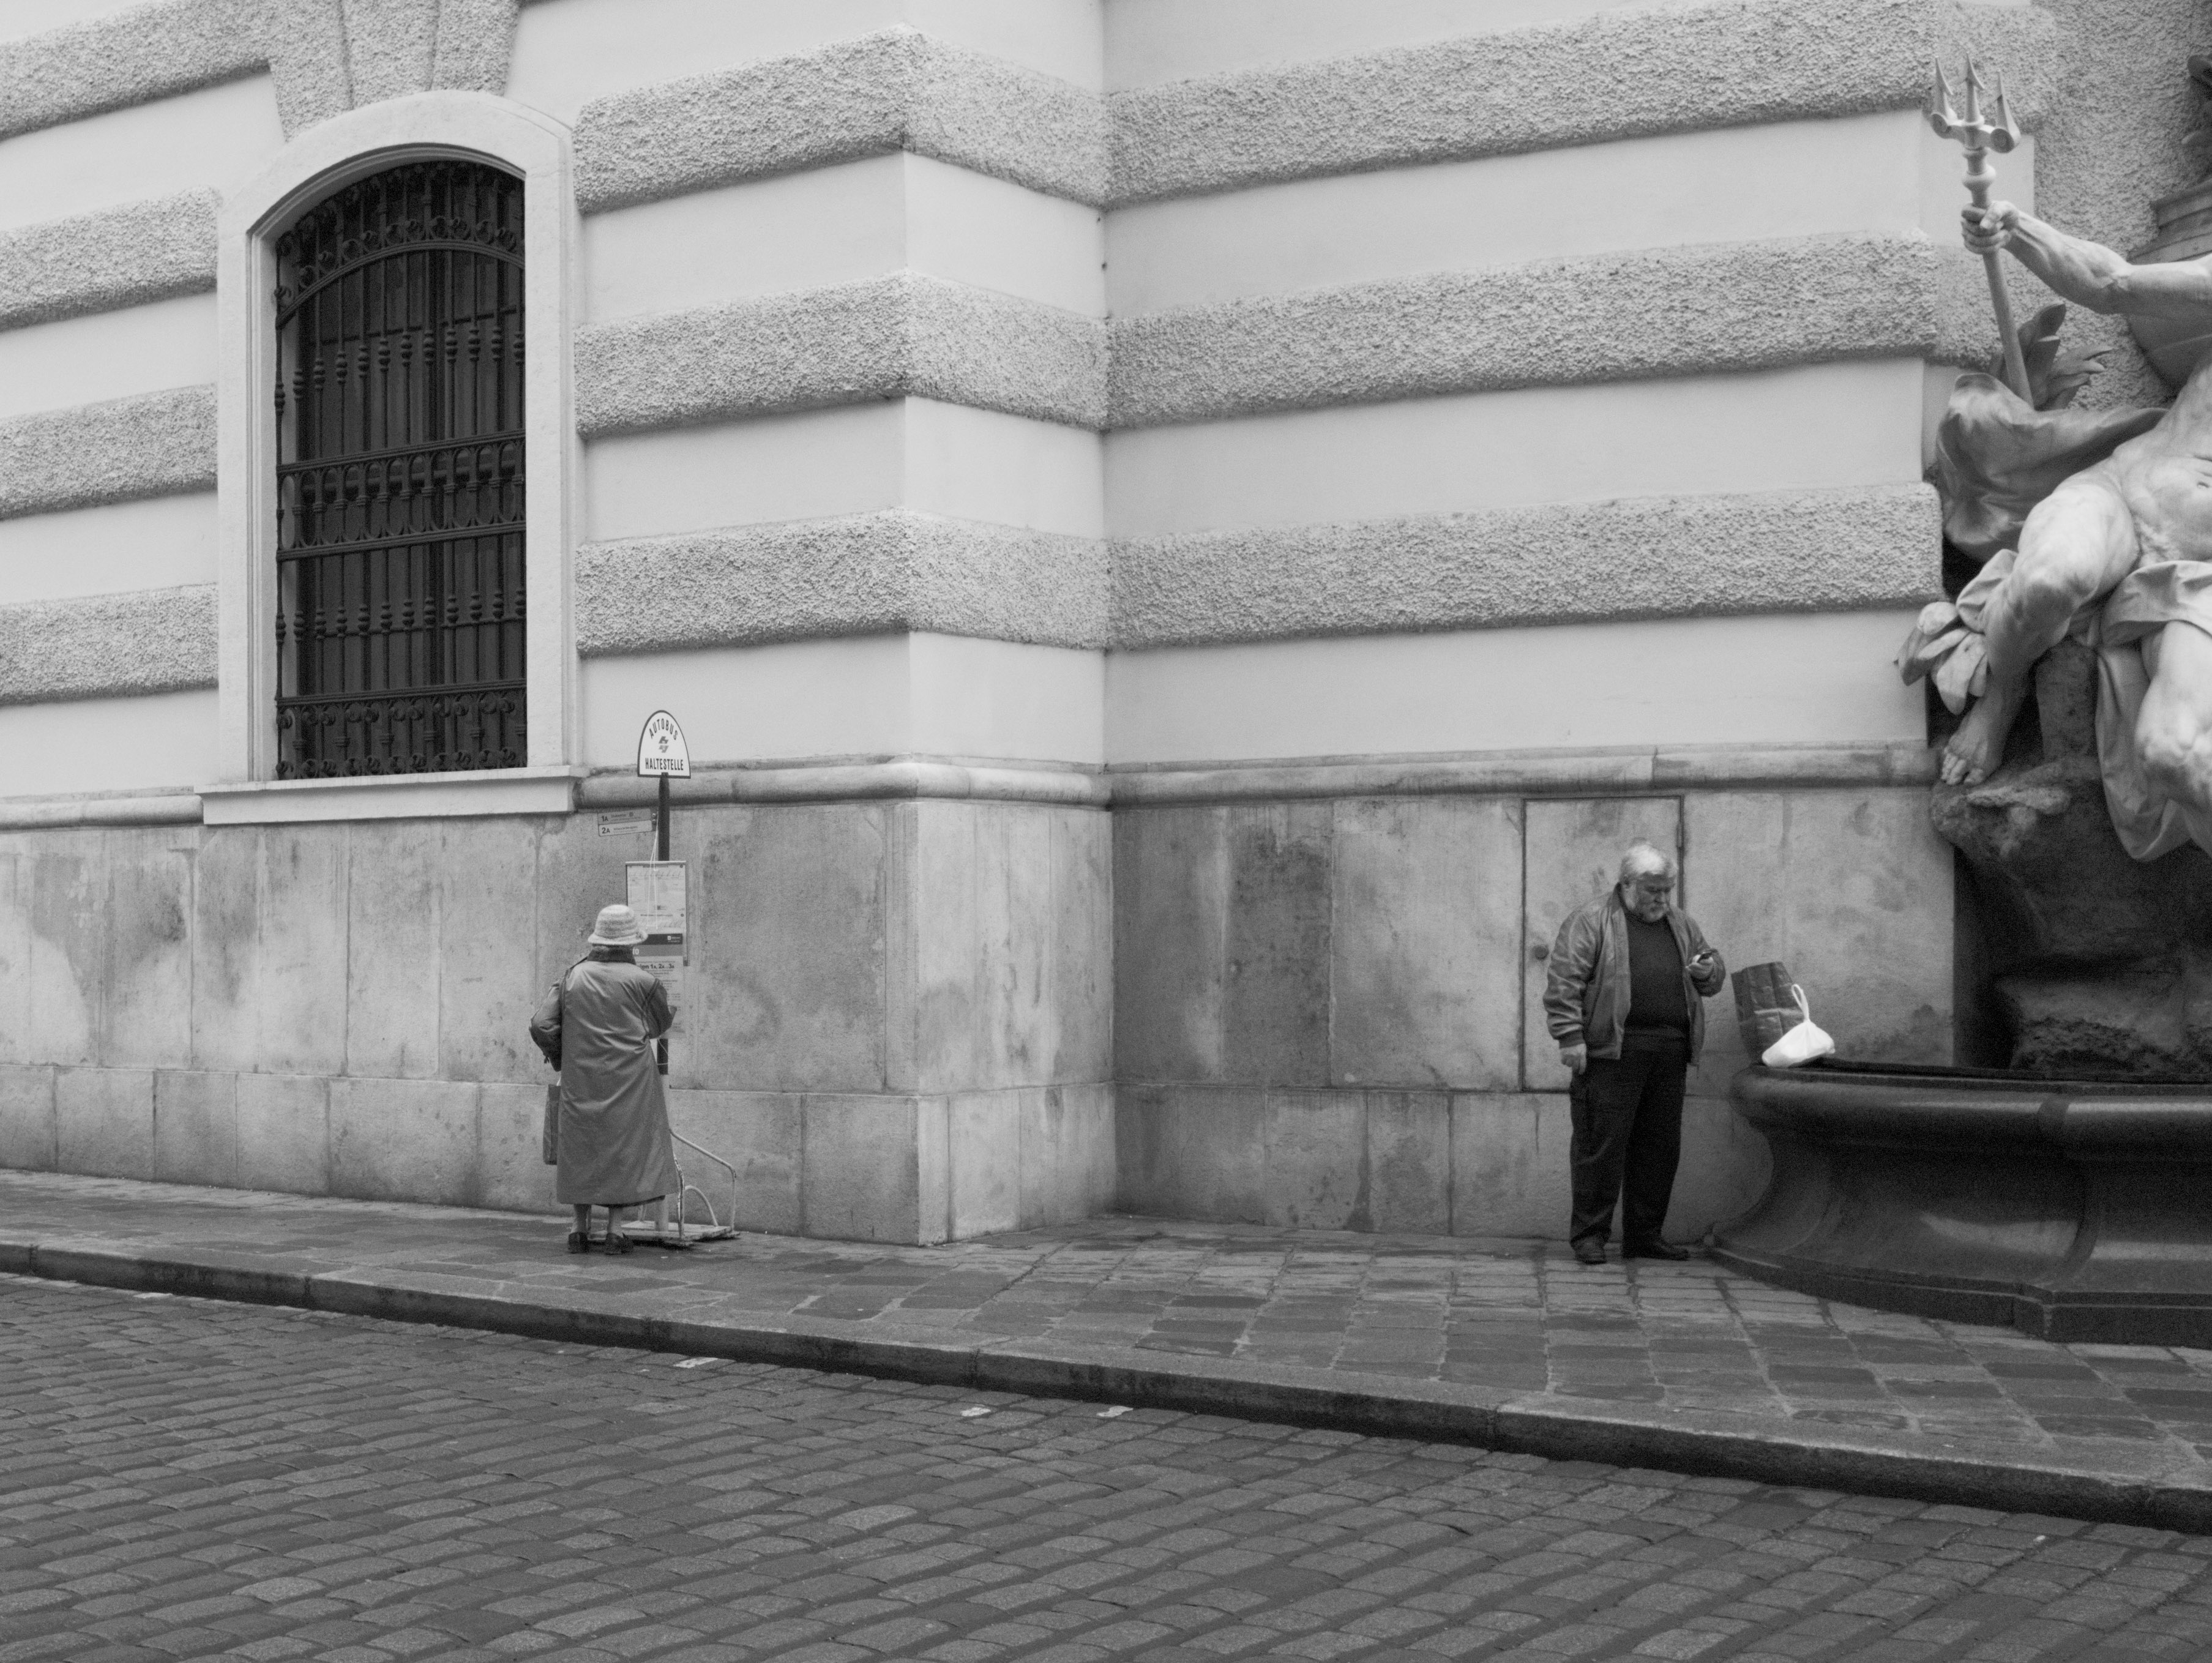 Waiting at Michaelerplatz (Innere Stadt, ) with Leica M Monochrom (Leica Summilux-M 35mm f/1.4 ASPH.) by Magnus L Andersson (photography.anderssoneklund.se) at 2012-12-17 11:19:46